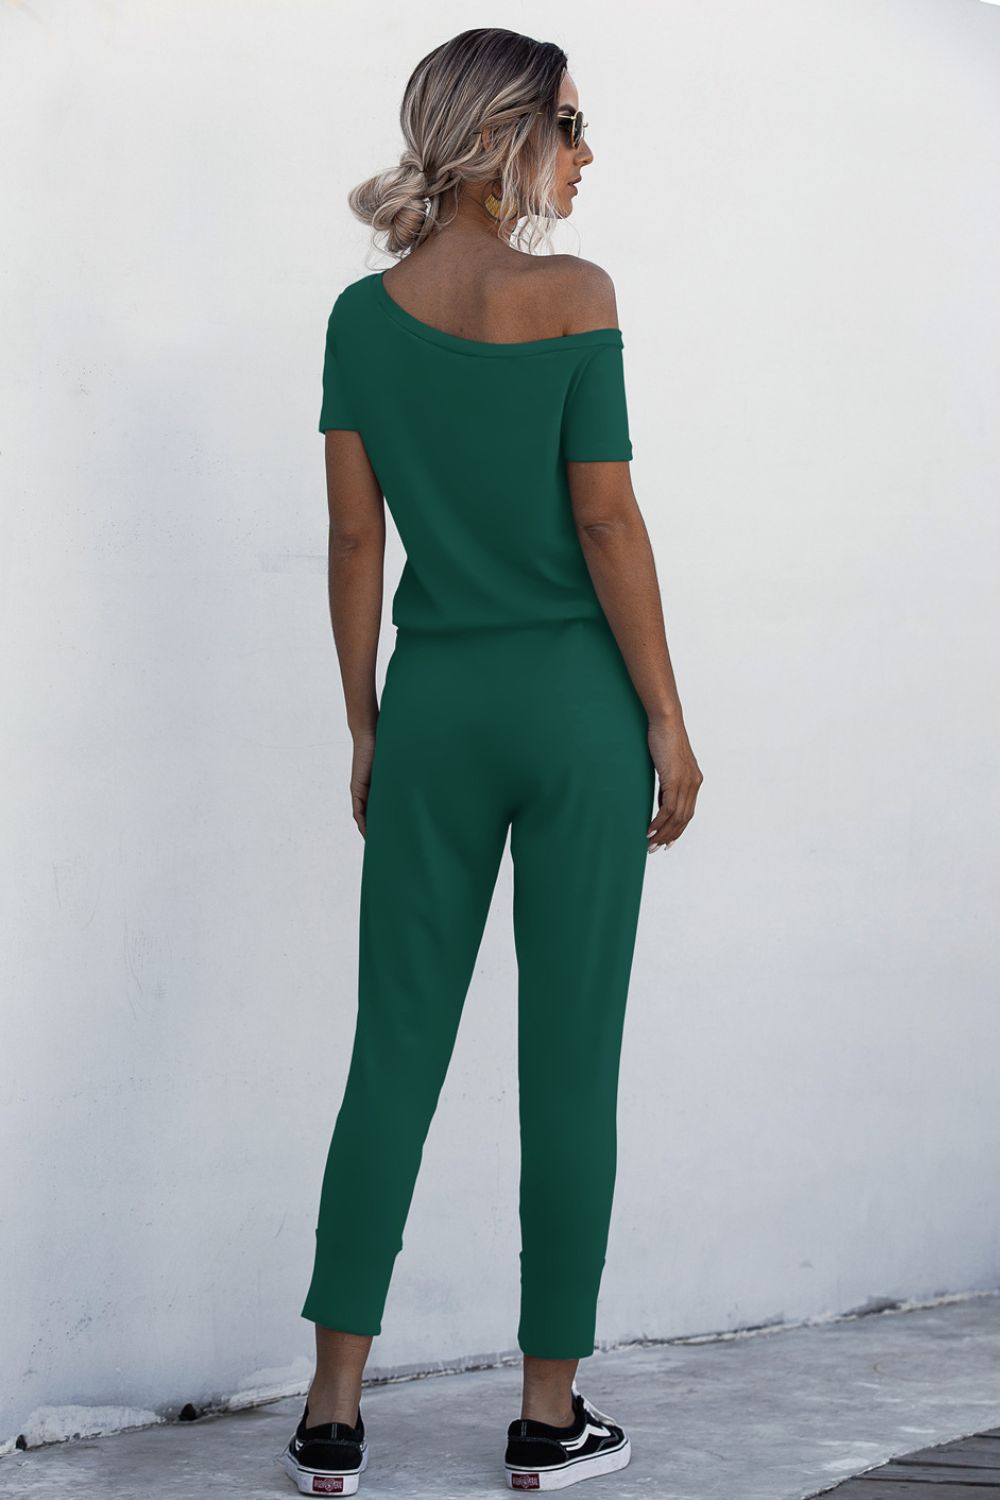 Asymmetrical Neck Tied Jumpsuit with Pockets  Sunset and Swim   